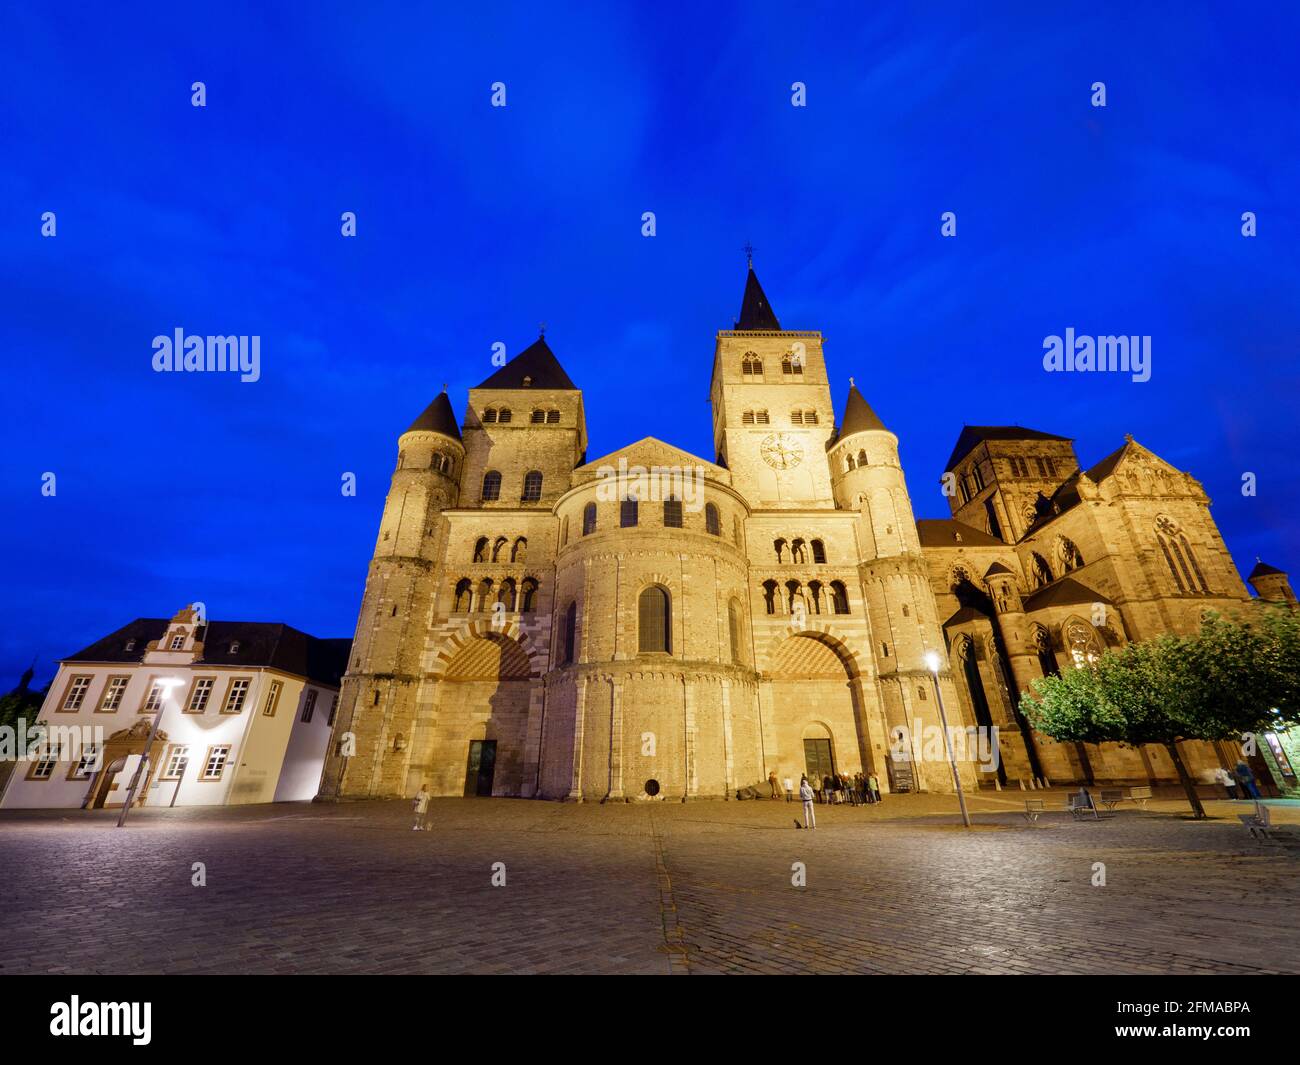 Cathedral and Church of Our Lady, dusk, Trier, UNESCO World Heritage, Rhineland-Palatinate, Germany Stock Photo